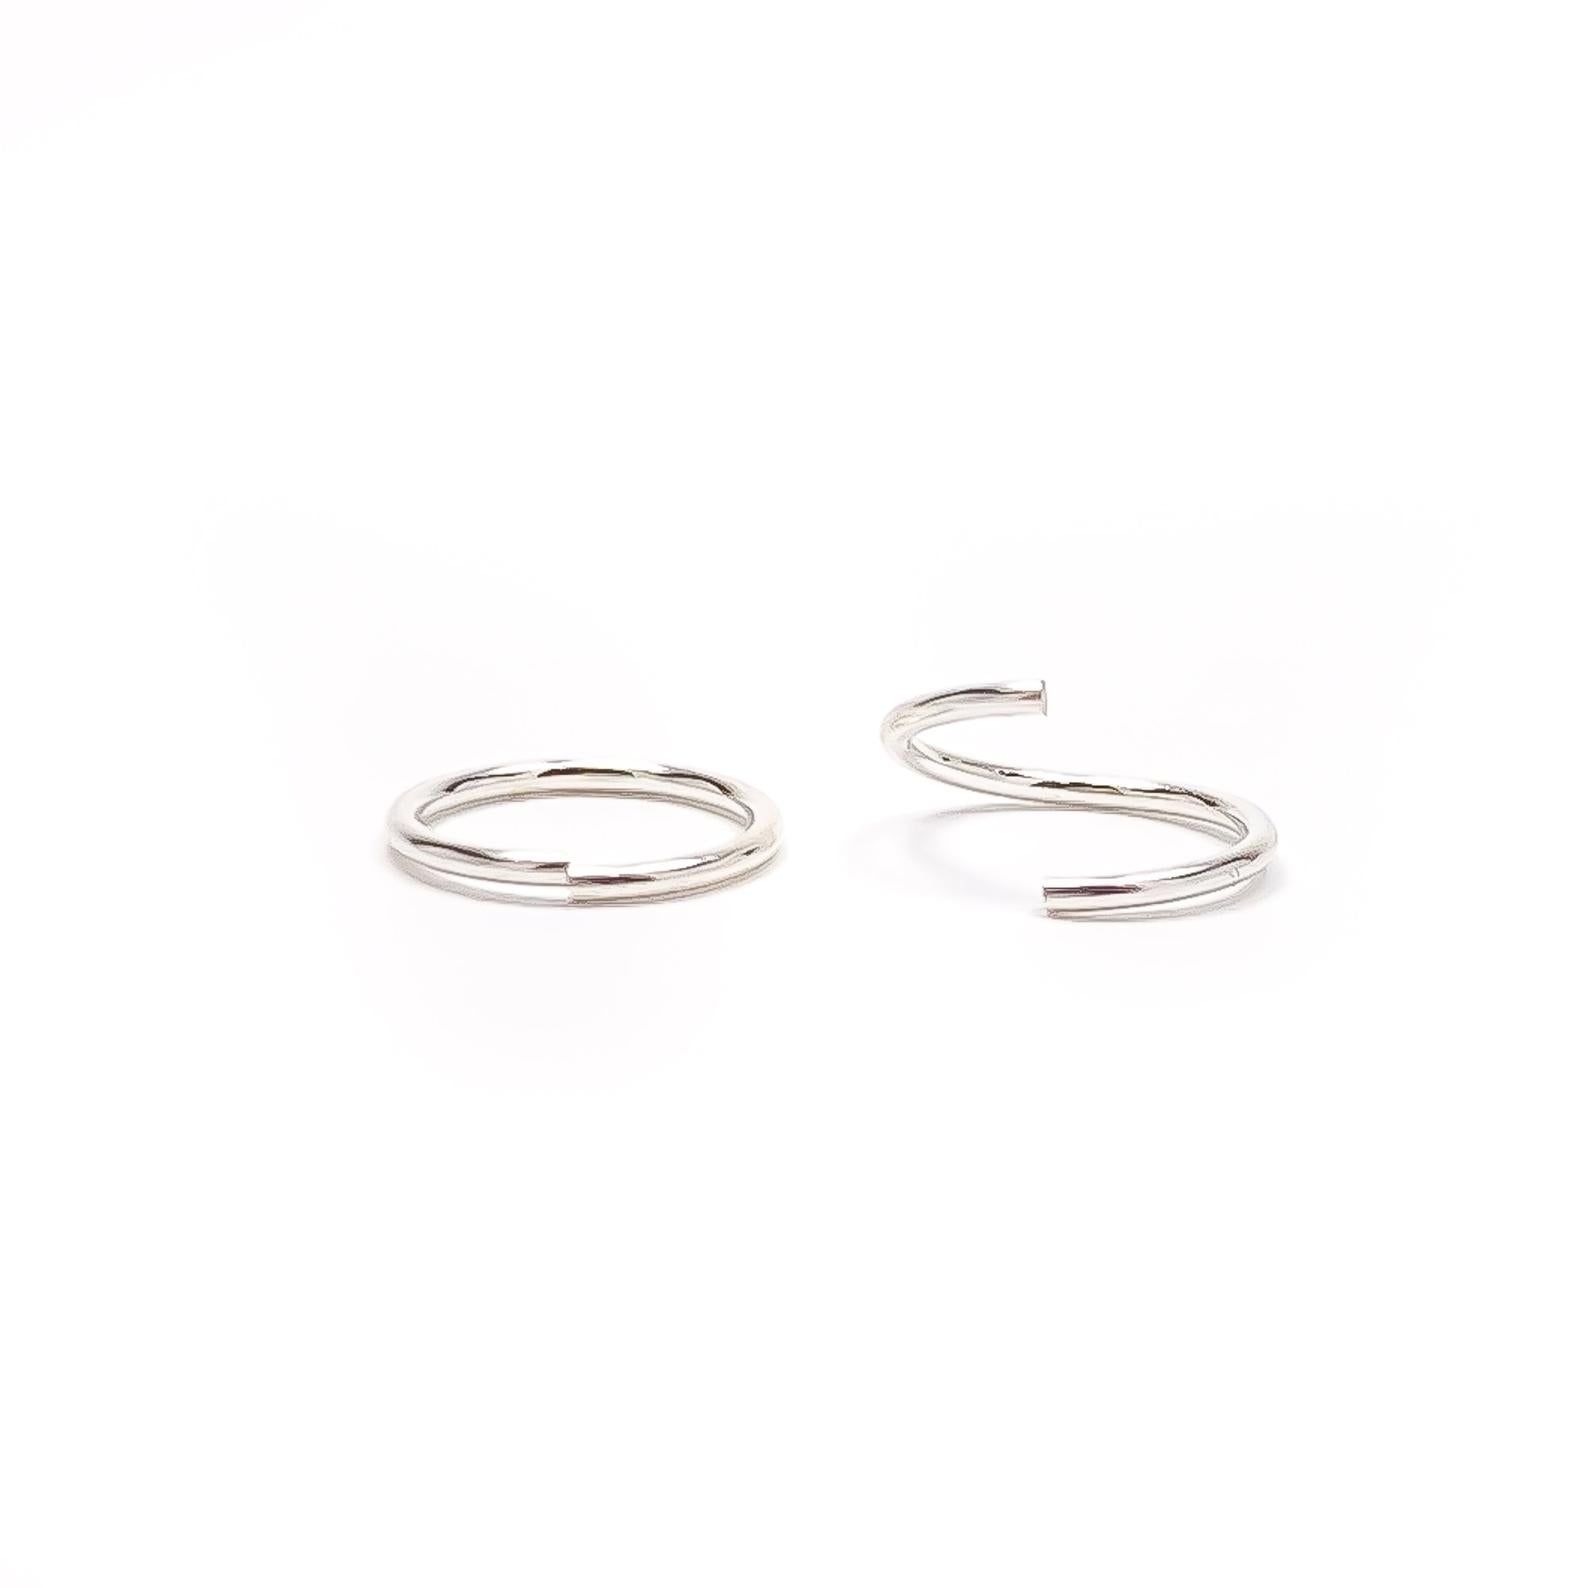 Buy Lightweight Hoop Earrings 50MM Sterling Silver Hoops Ear Rings for  Women Simple Jewelry Nice Looking Online at Lowest Price Ever in India |  Check Reviews & Ratings - Shop The World